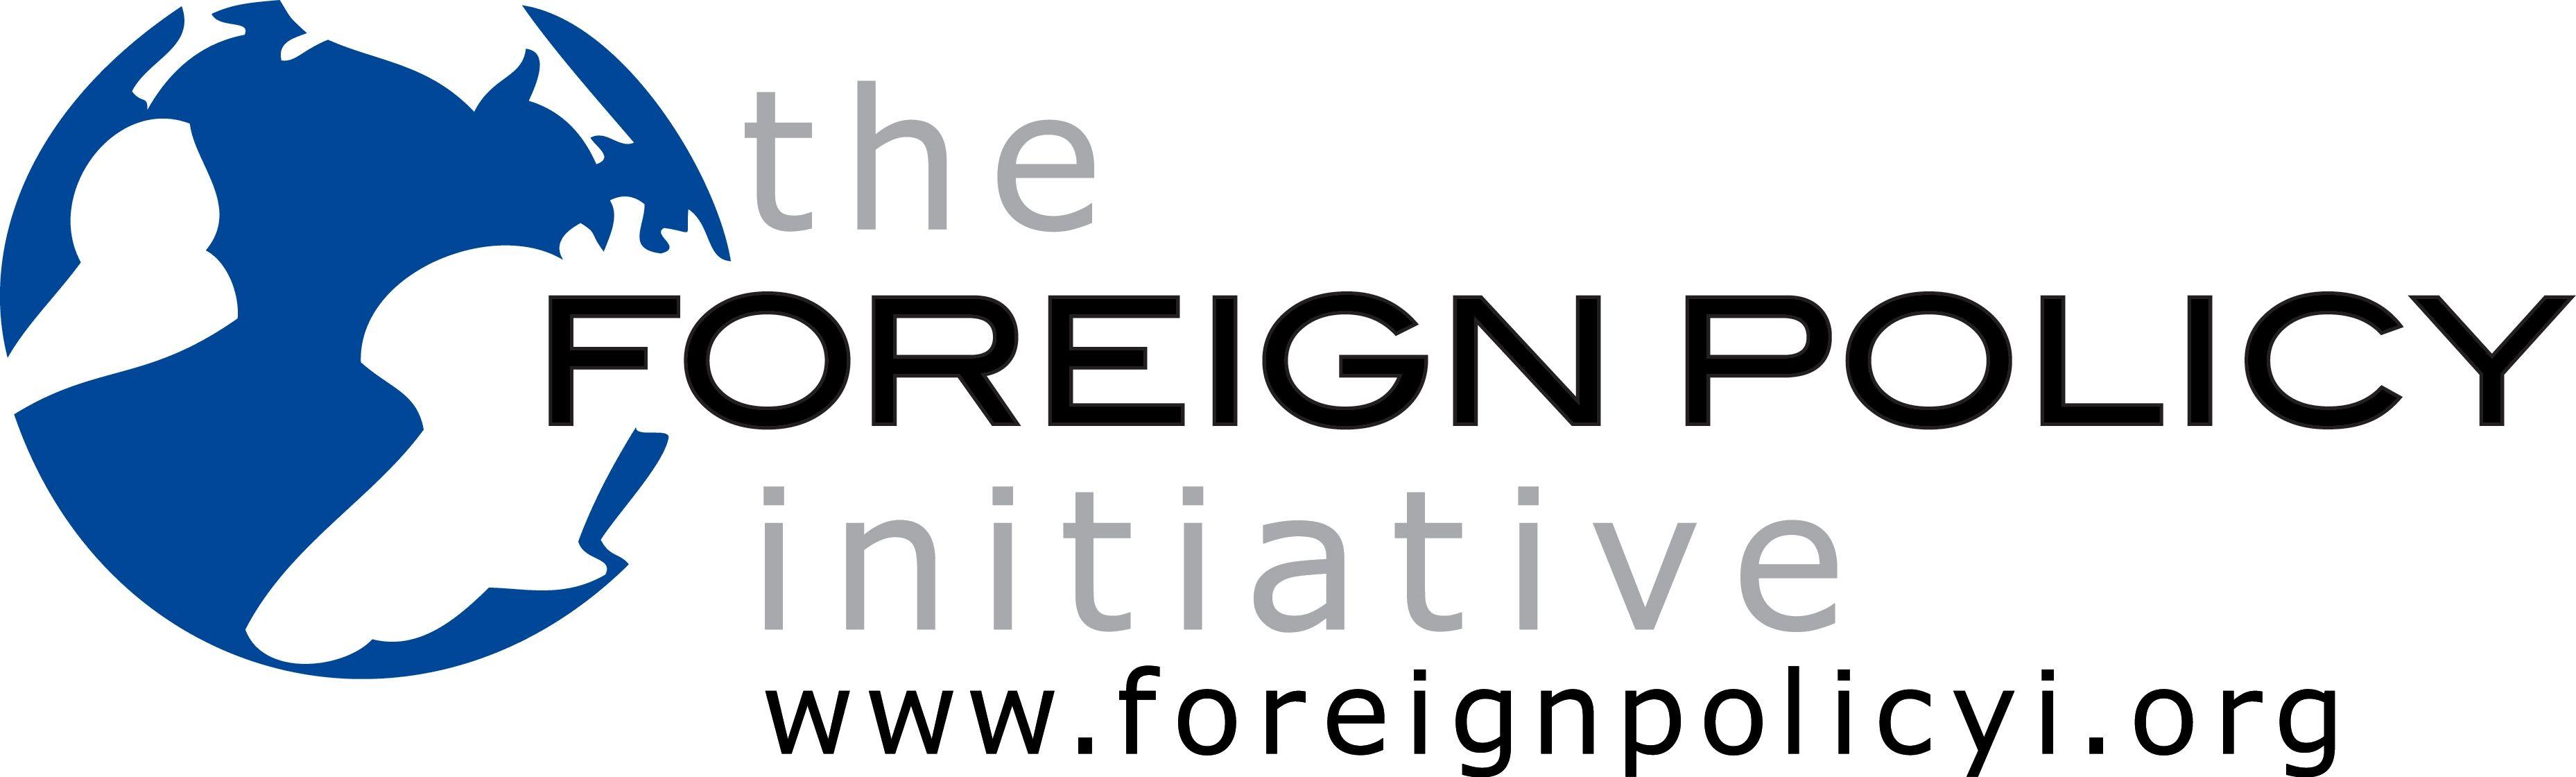 Foreign Media Logo - File:The Foreign Policy Initiative Logo.jpg - Wikimedia Commons